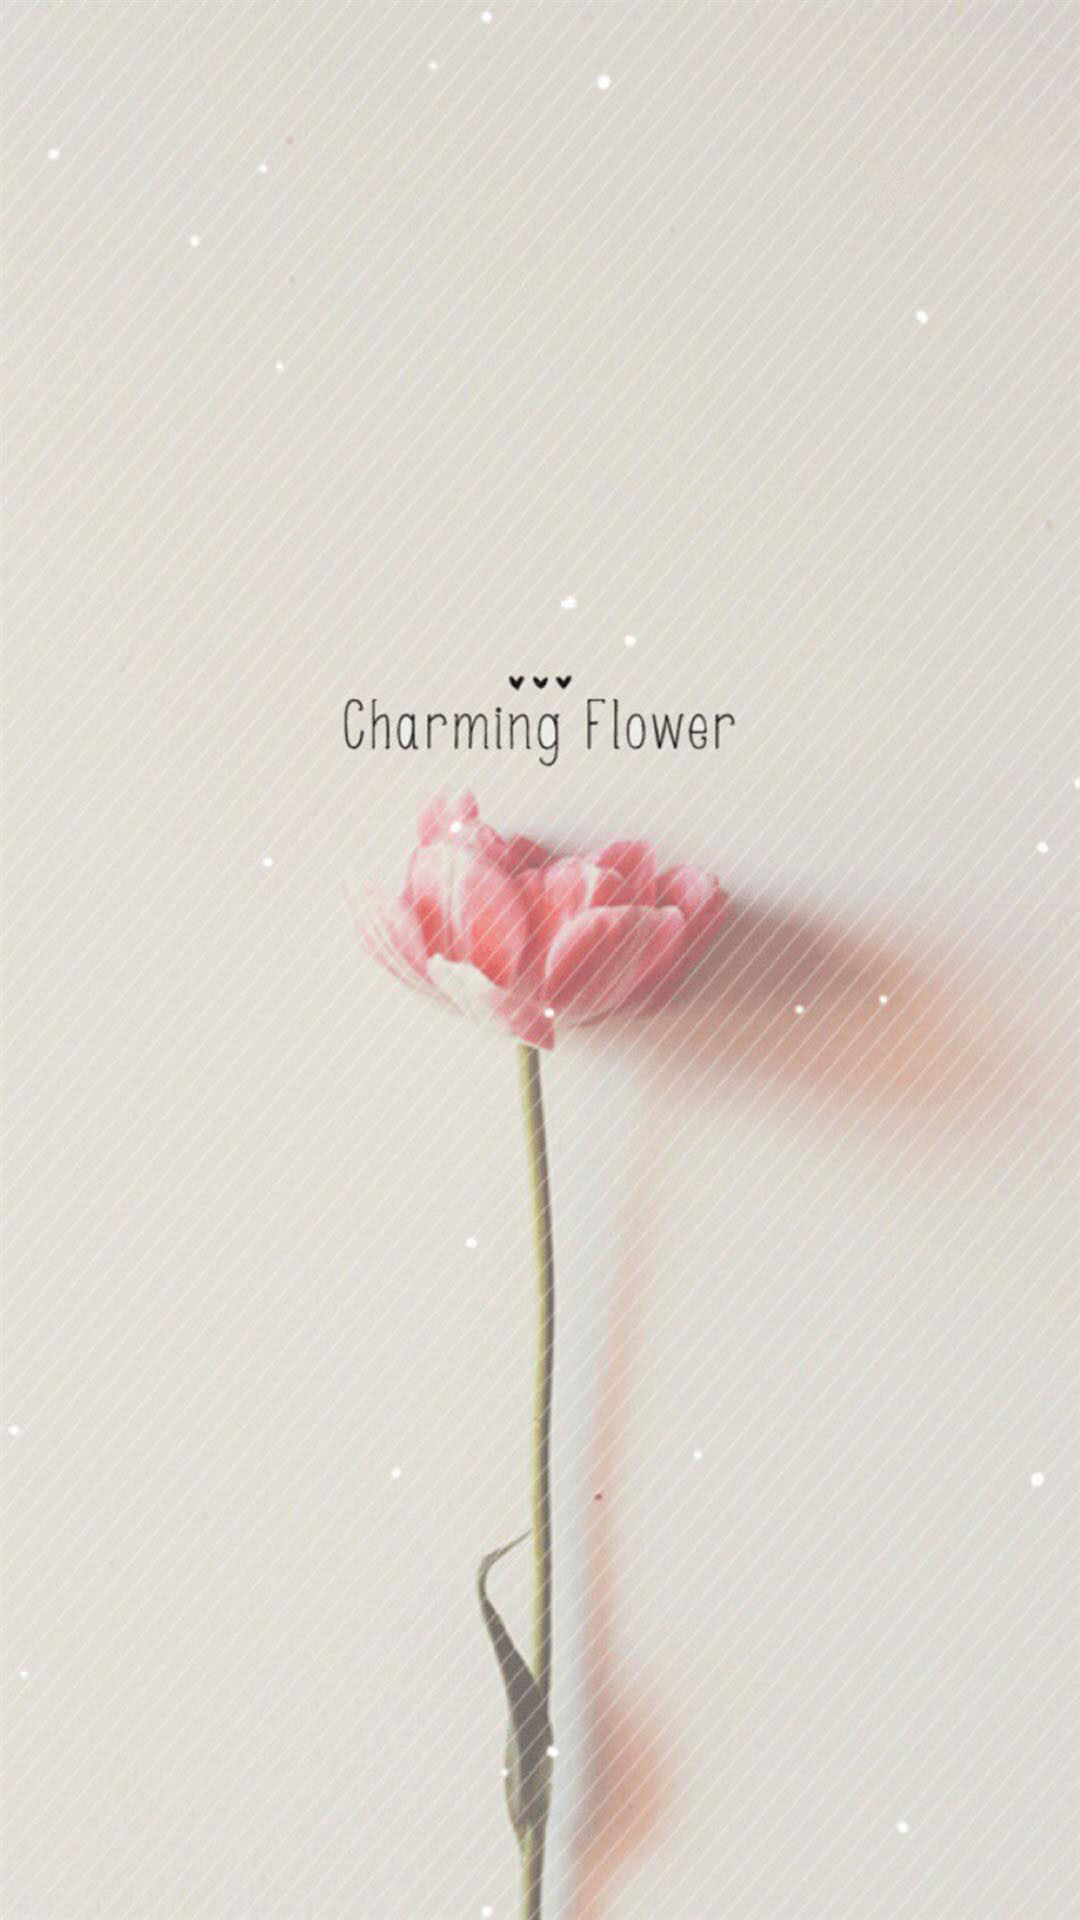 1080x1920 Flowers hd wallpaper for android phone home screen wallpaper. Â«Â«